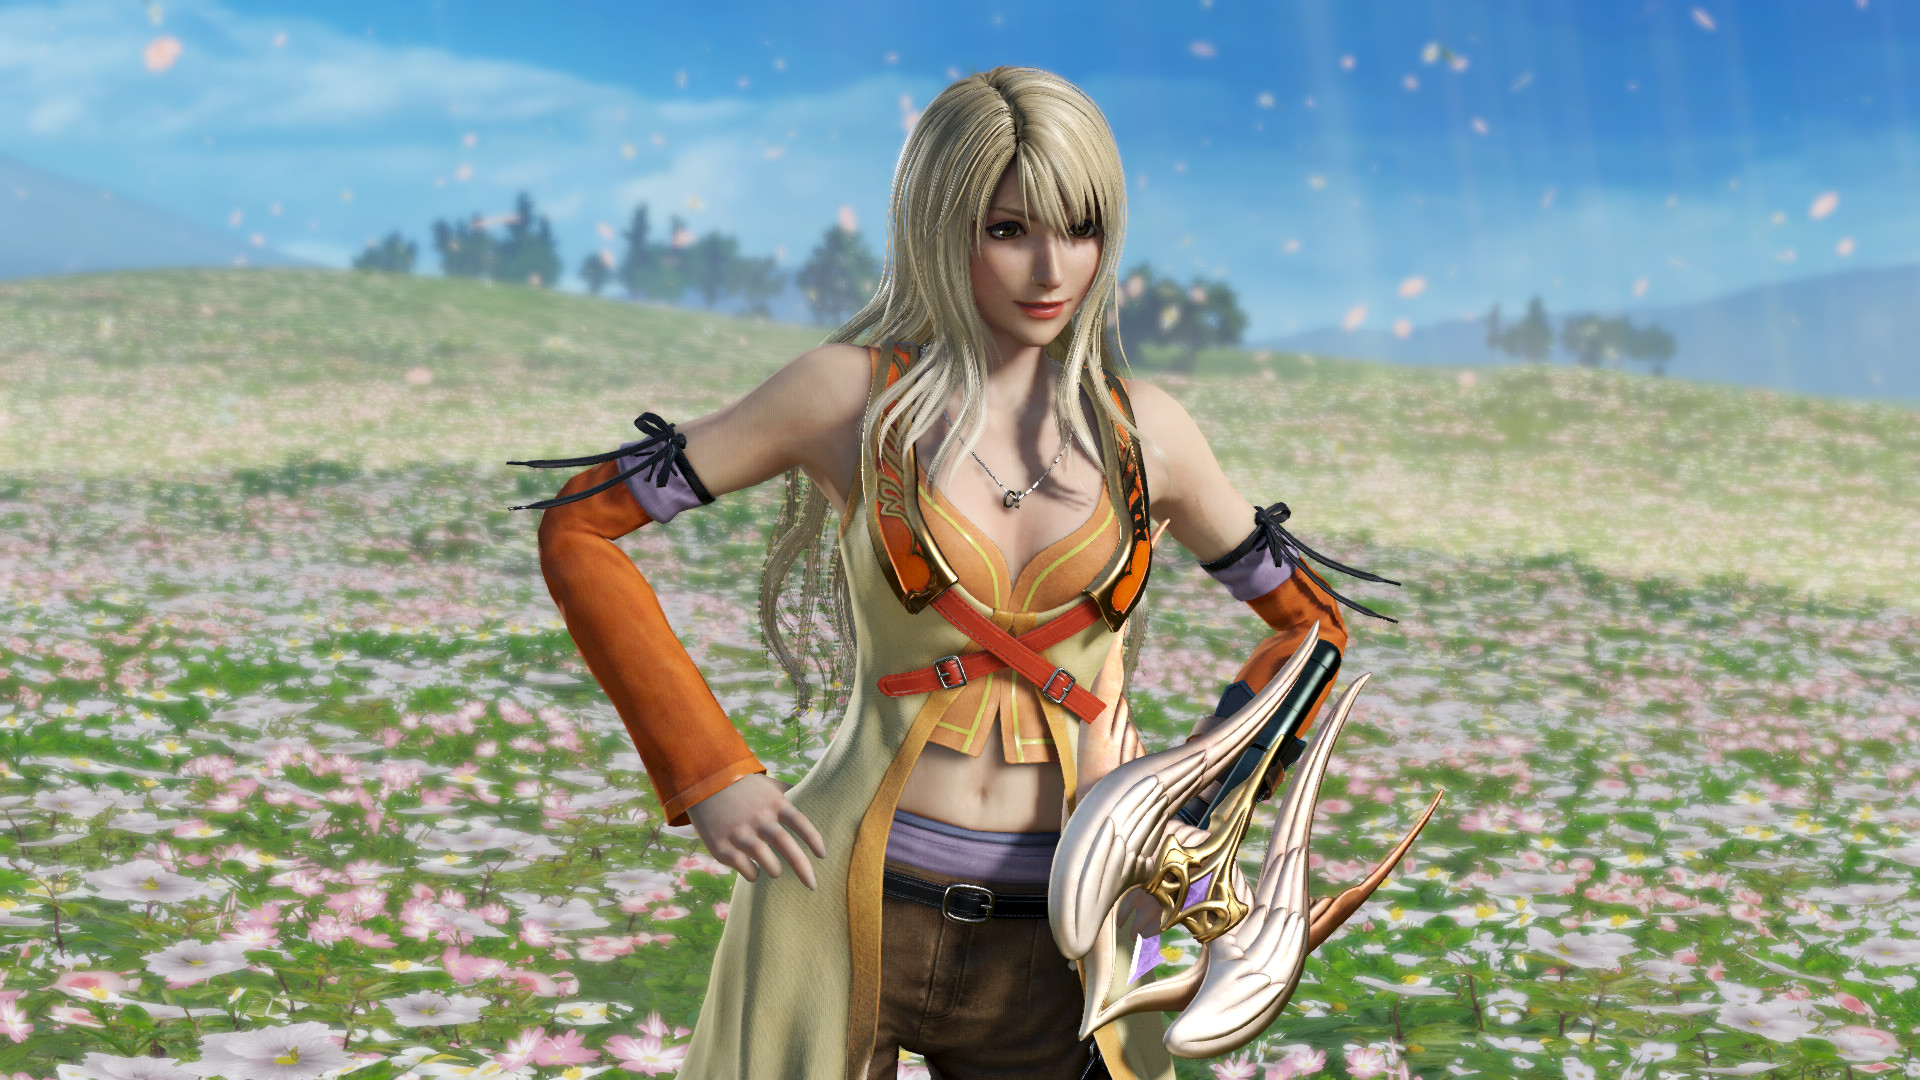 DFF NT: Wings of Love Appearance Set & 5th Weapon for Rinoa Heartilly Featured Screenshot #1